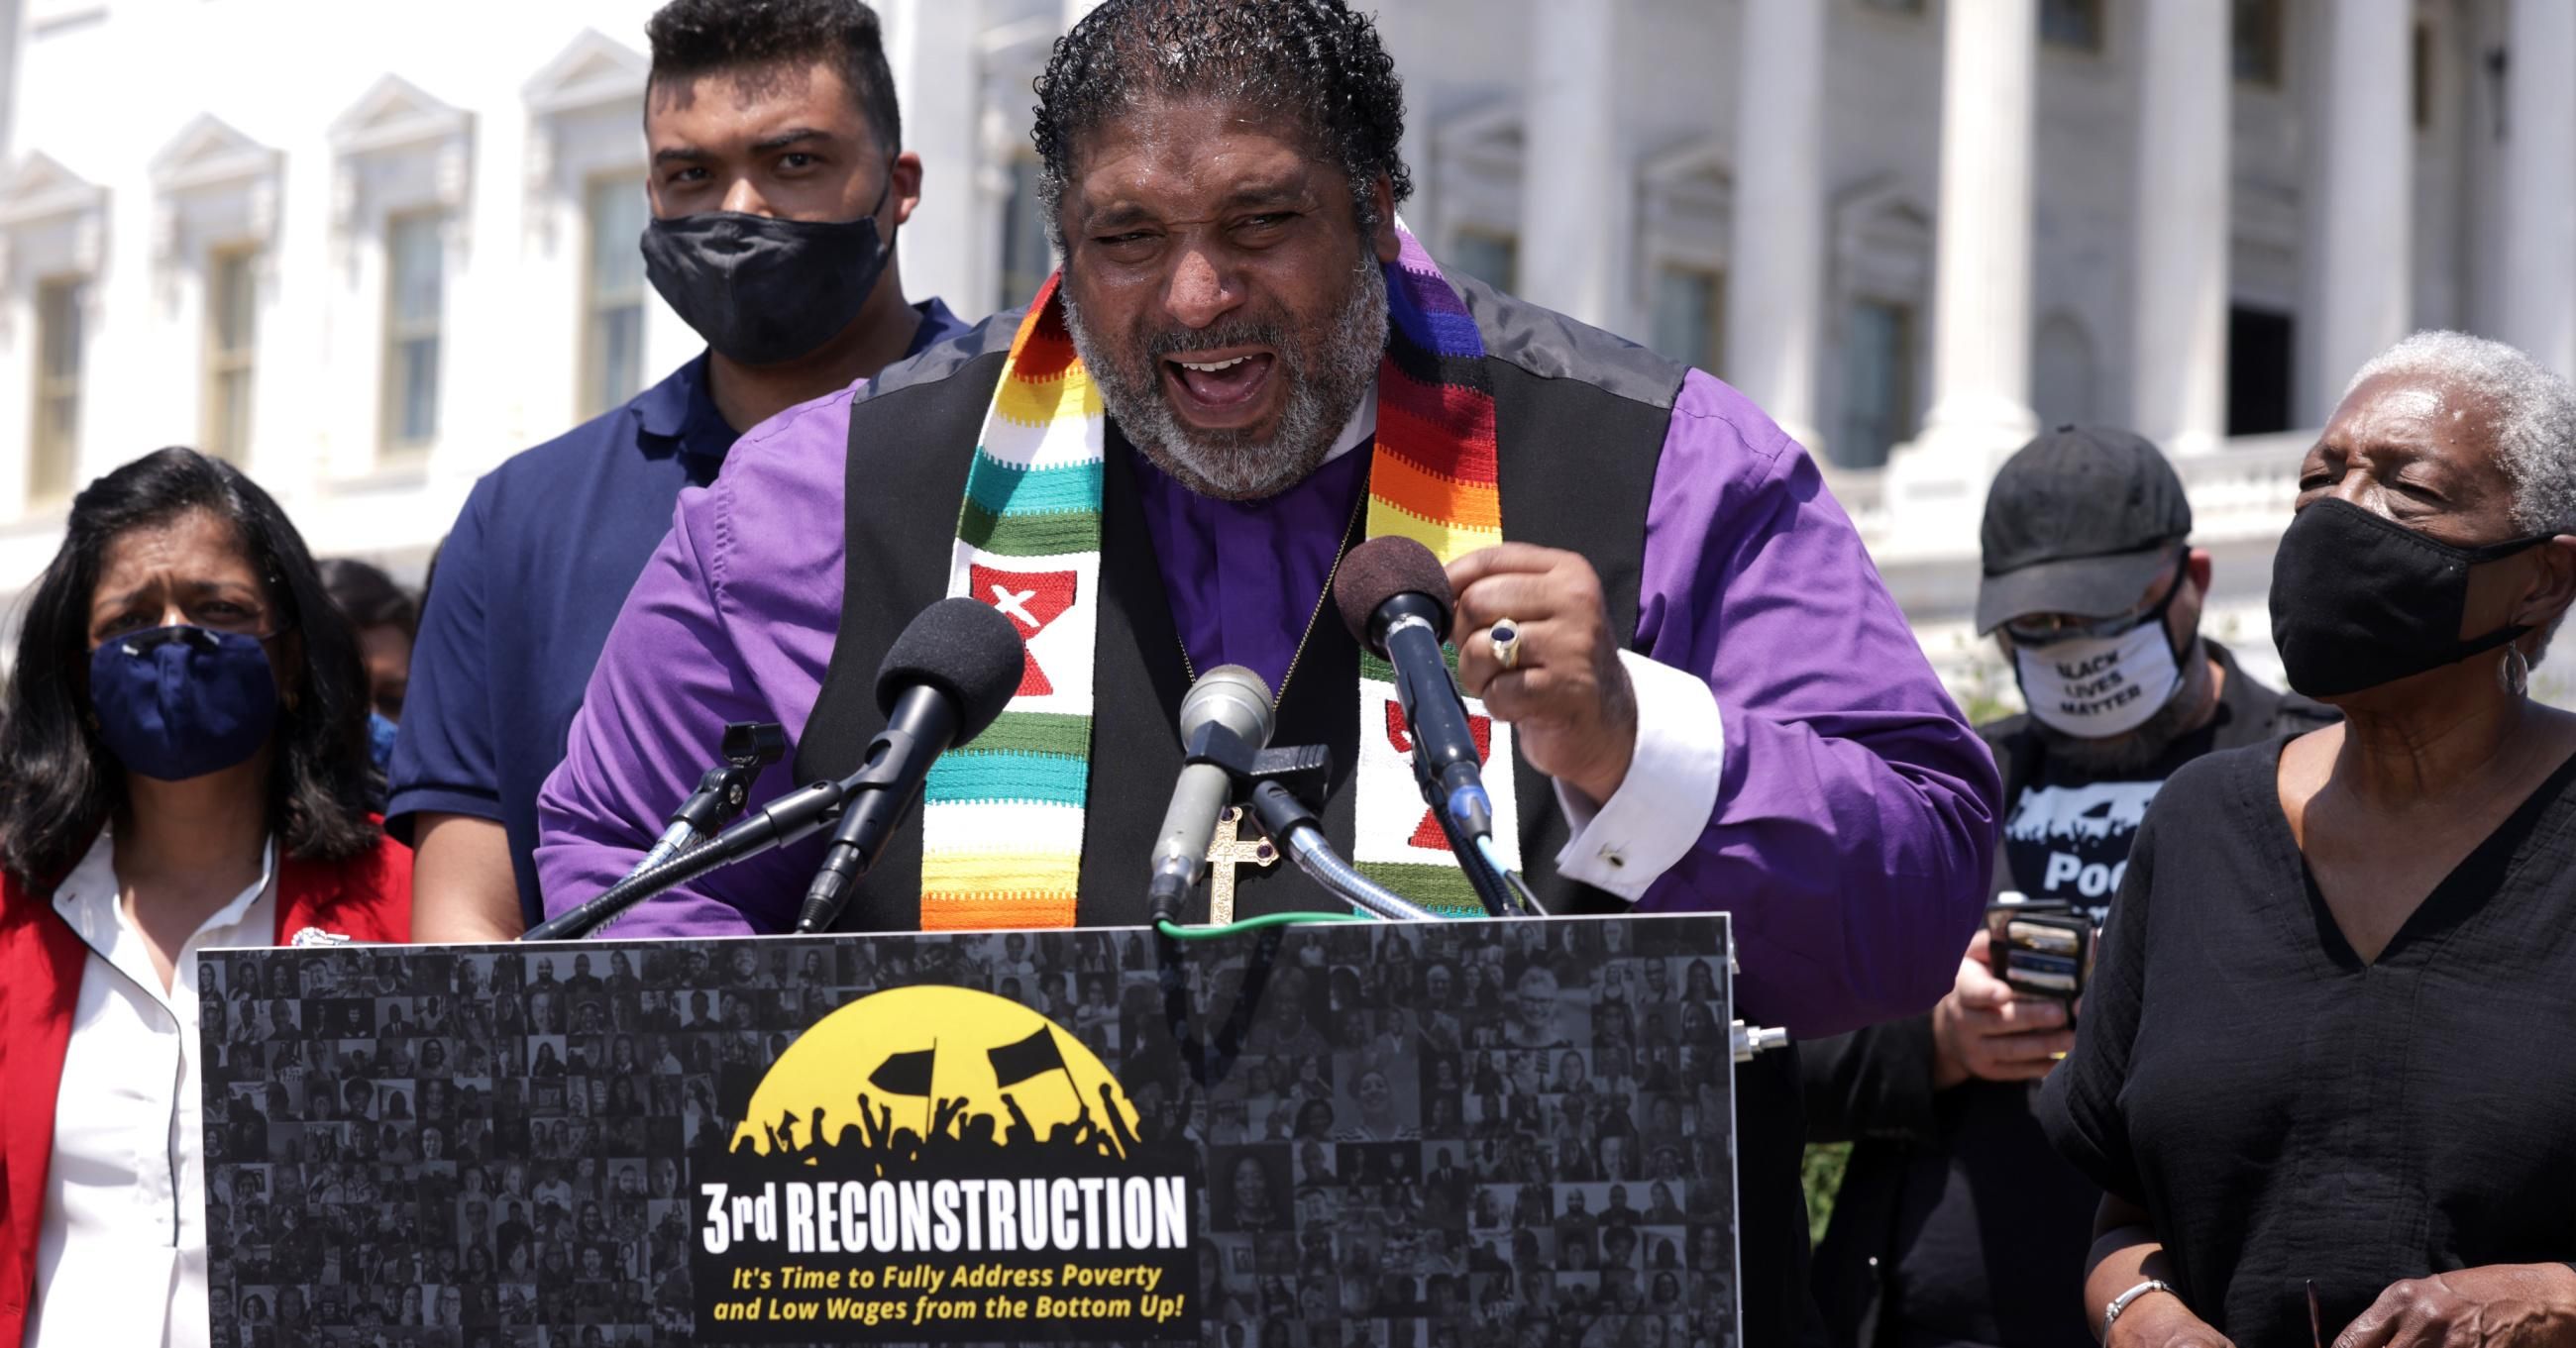 Rev. Dr. William Barber, co-chair of the Poor People’s Campaign, speaks about the Third Reconstruction resolution outside the U.S. Capitol May 20, 2021. (Photo: Alex Wong/Getty Images)